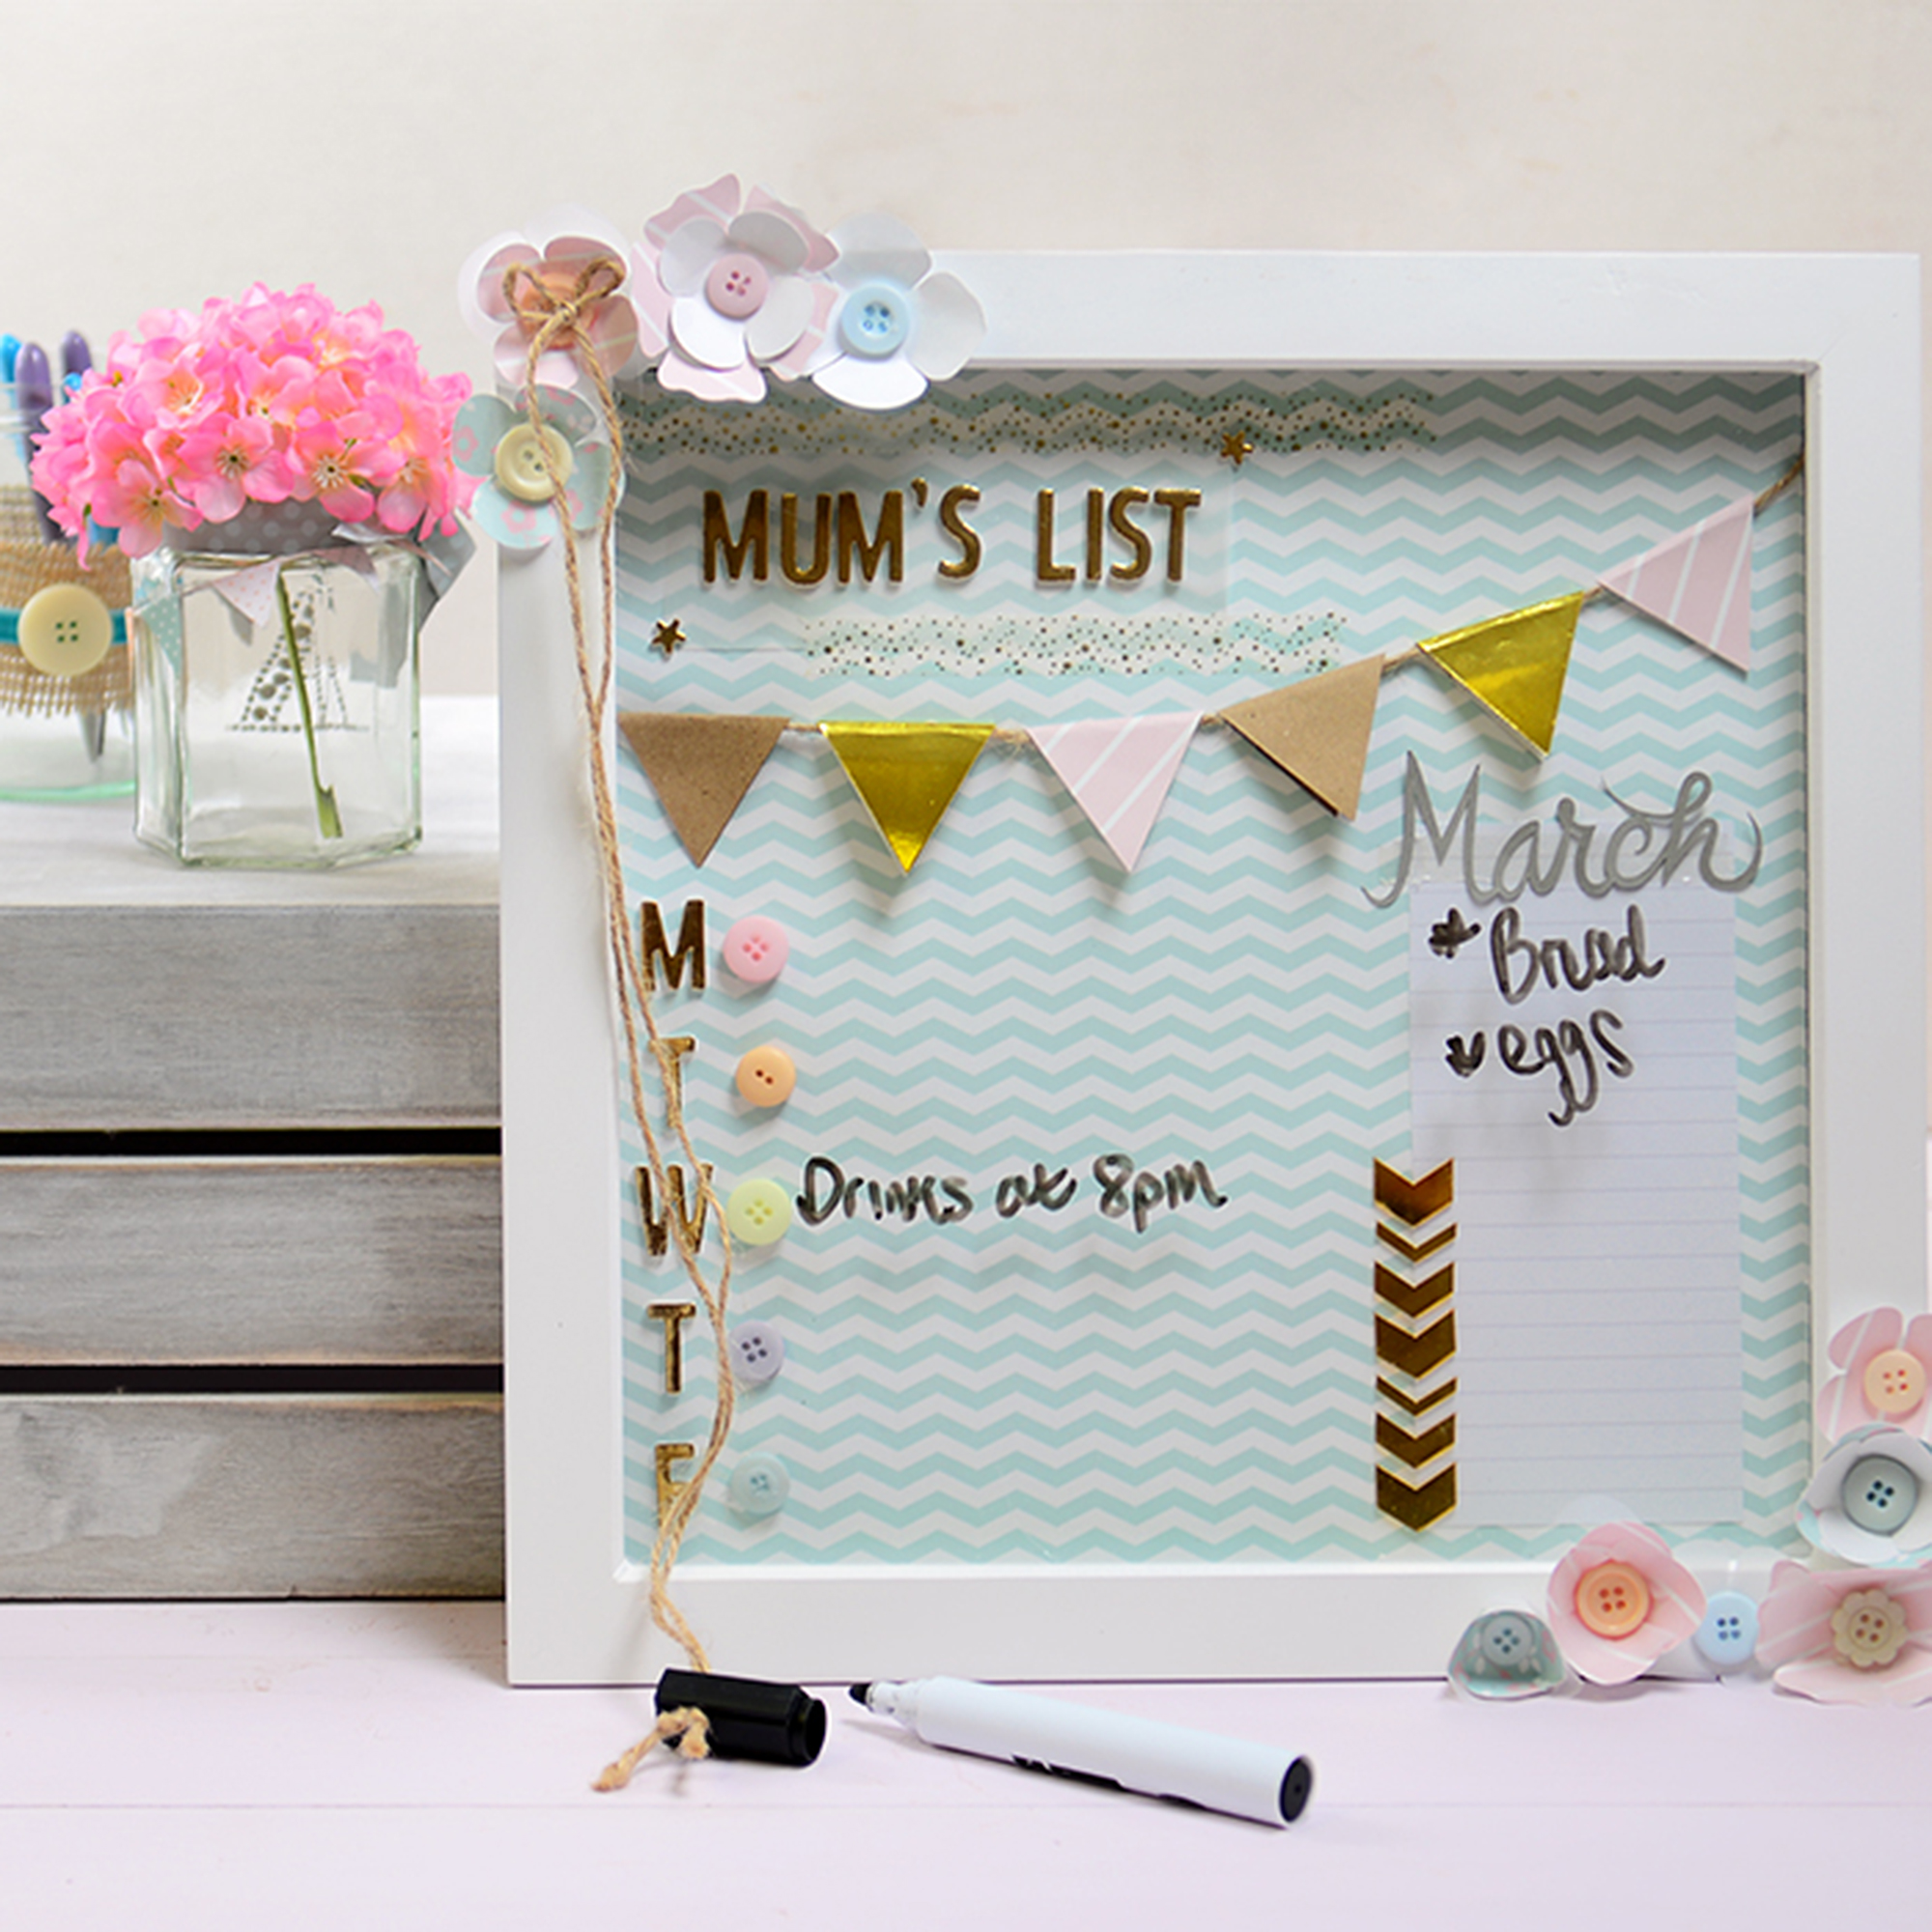 How to Make a Memory Frame Notice Board | Hobbycraft